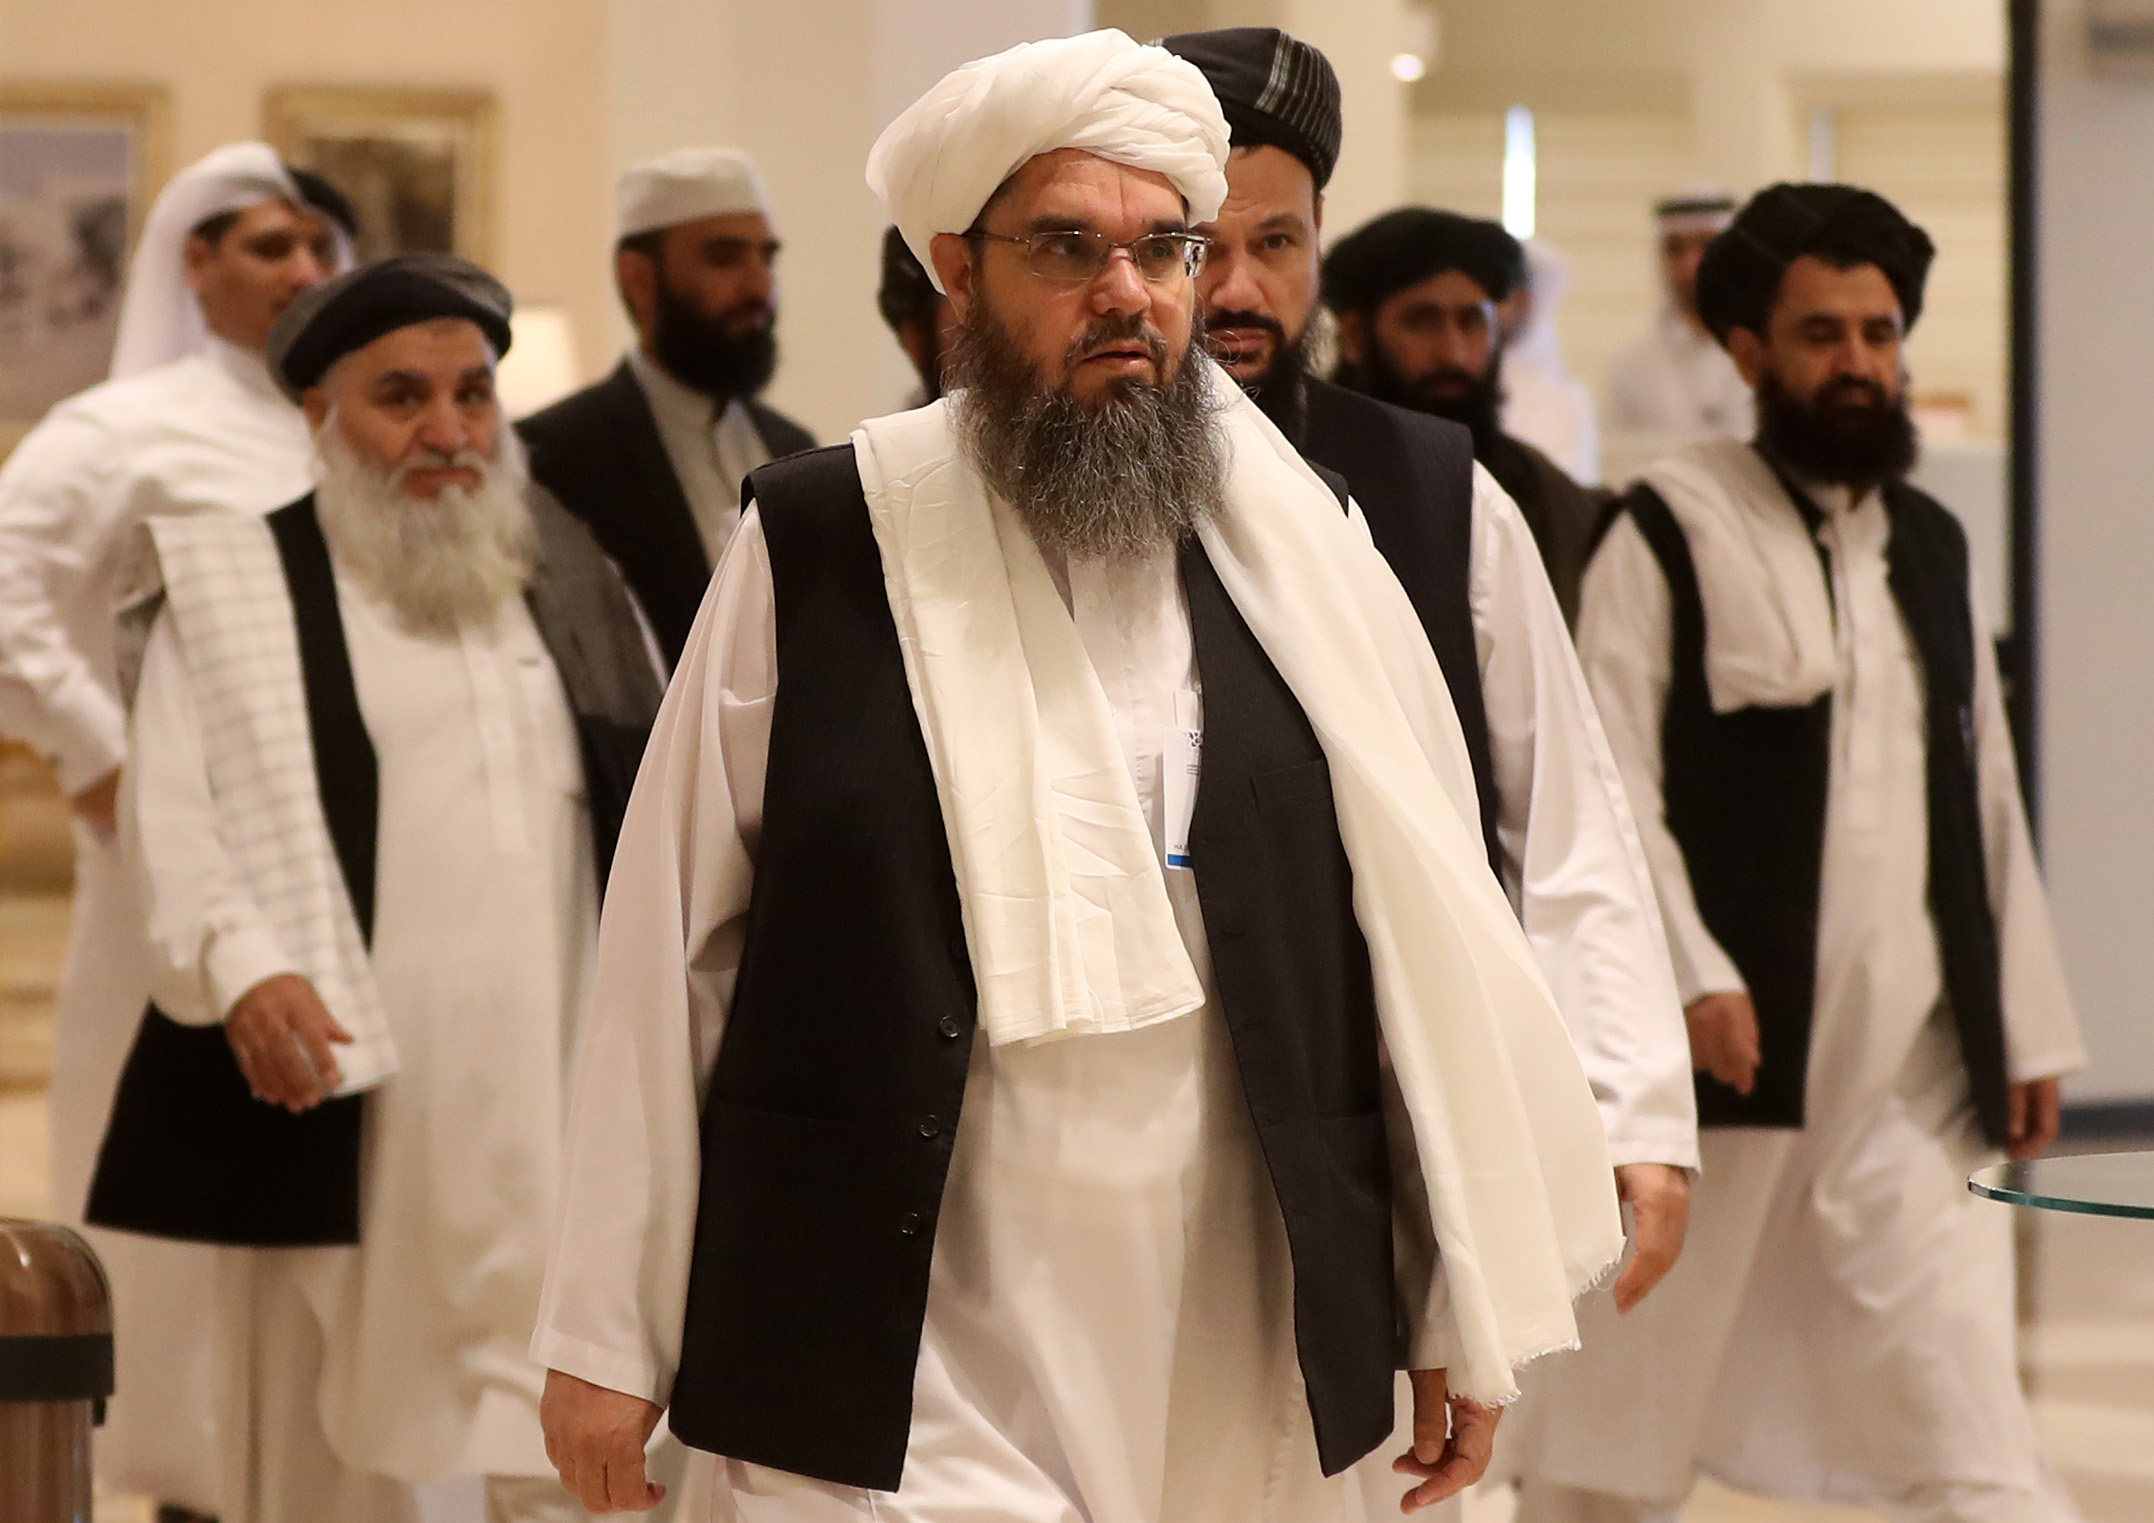 PHOTO: The Taliban's former envoy to Saudi Arabia Shahabuddin Delawar (C) arrives with other Taliban mebmers to attend the Intra Afghan Dialogue talks in the Qatari capital Doha on July 7, 2019.